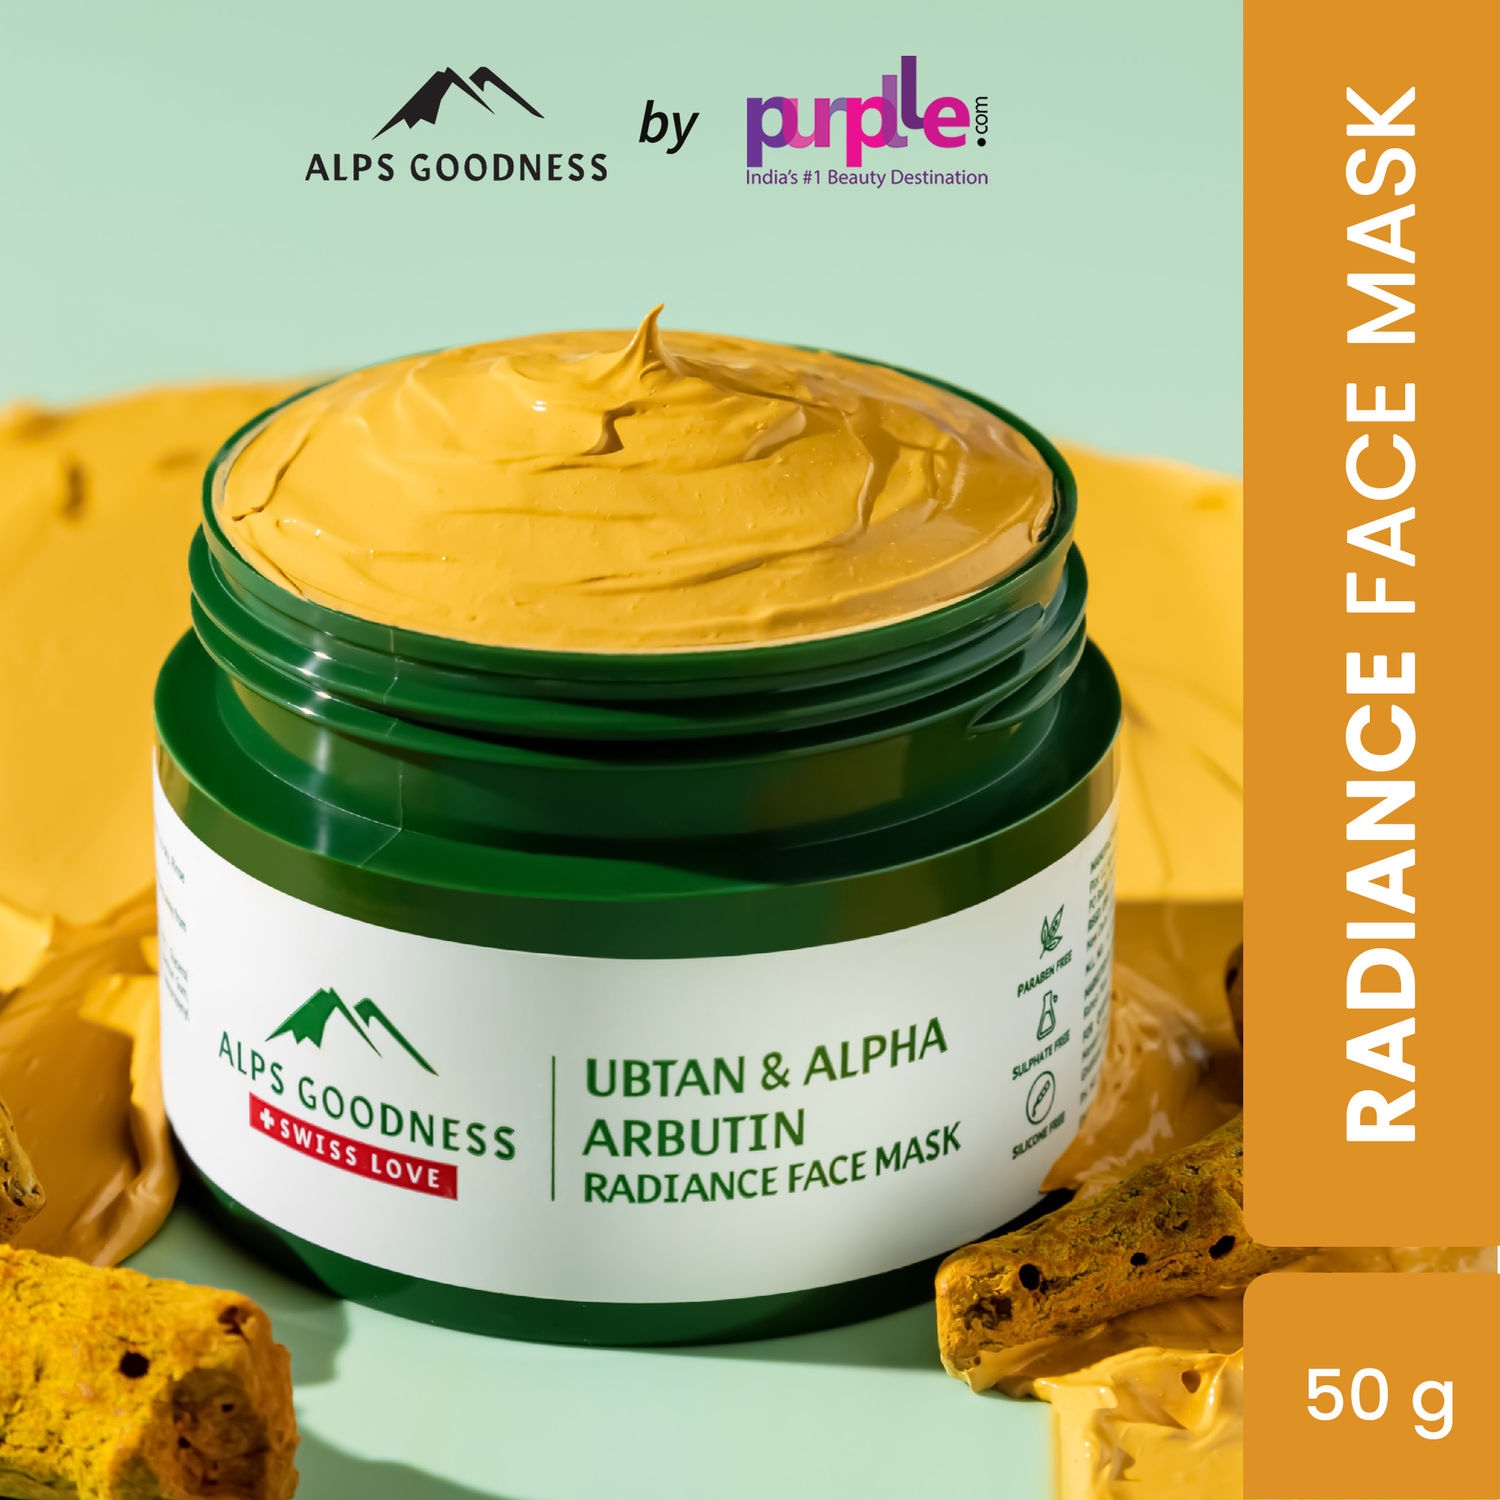 Buy Alps Goodness Ubtan & Alpha Arbutin Radiance Clay Face Mask (50gm) |Paraben, Sulphate, Silicone, Mineral Oil Free | Tan removal |De tan - Purplle